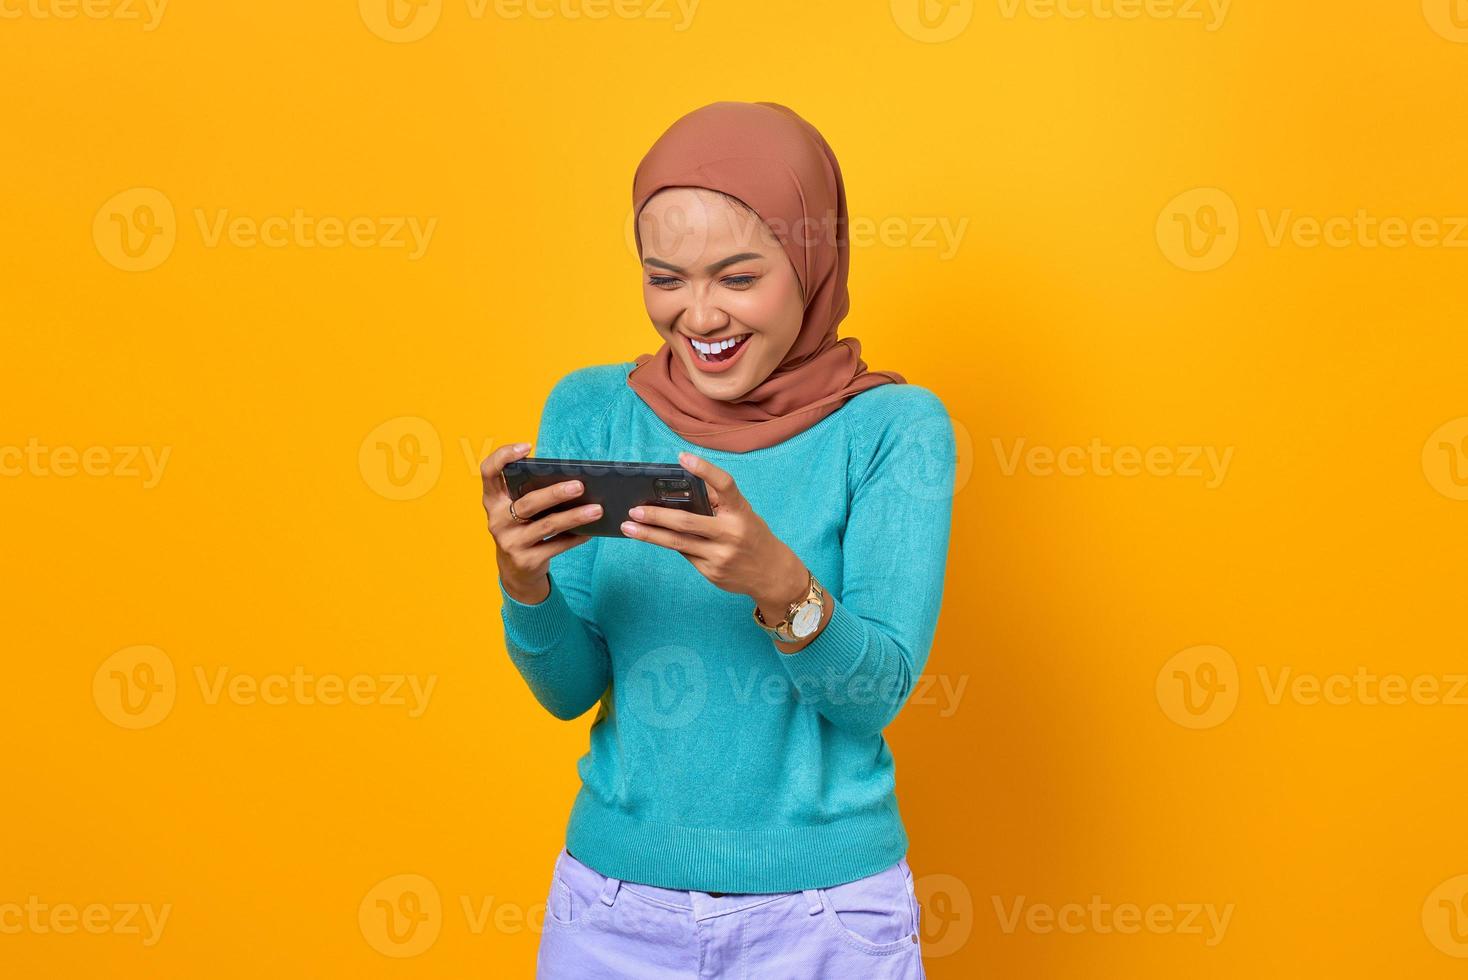 Cheerful young Asian woman playing a video game on a smartphone on yellow background photo